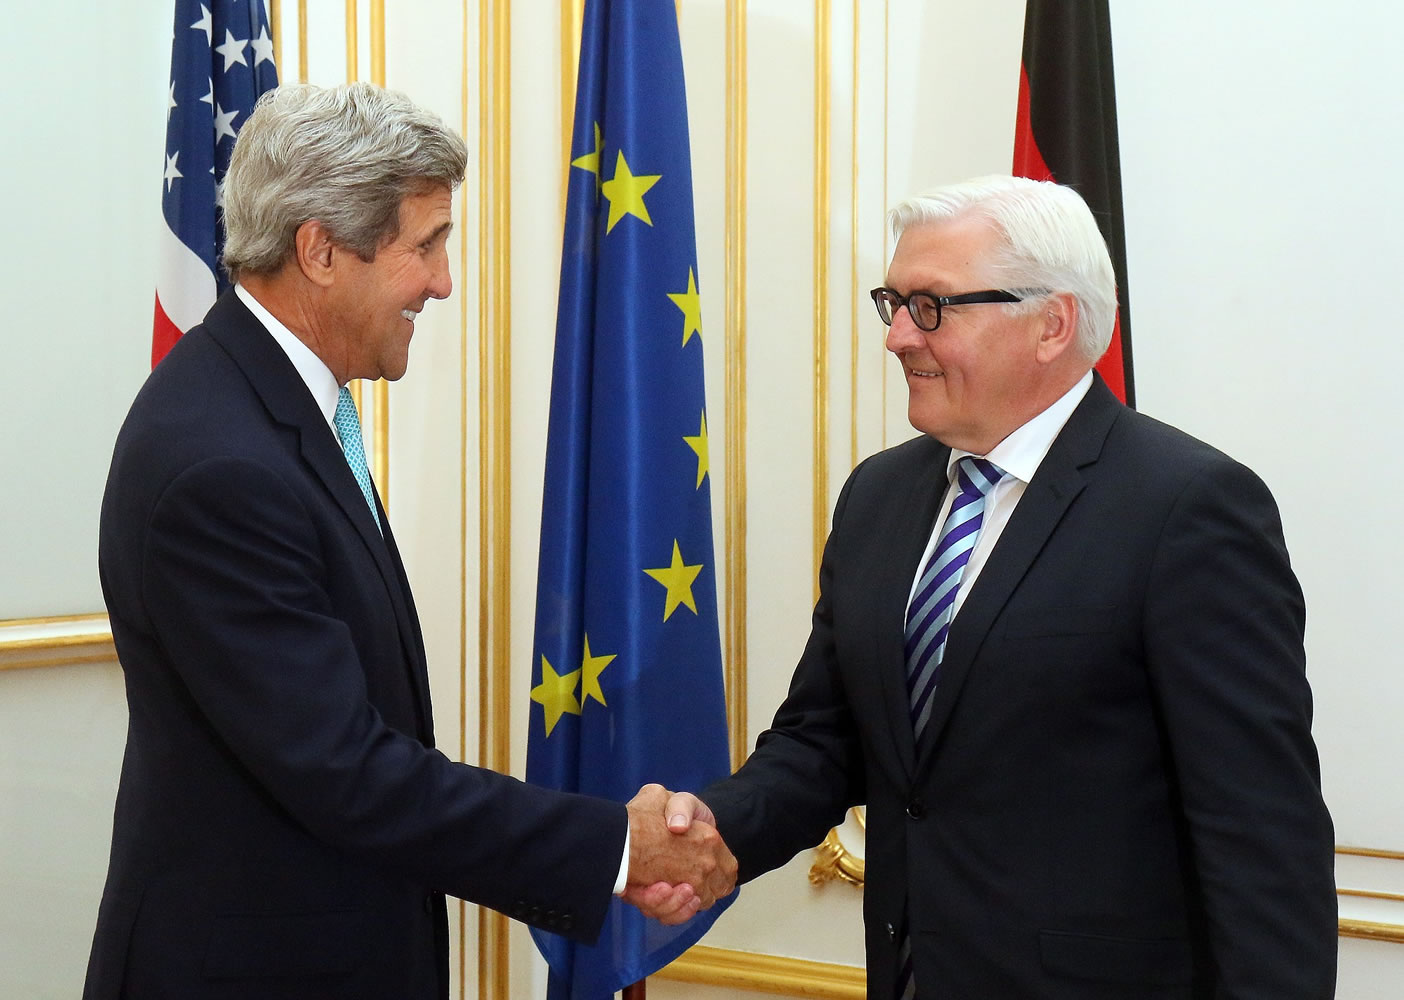 Secretary of State John Kerry, left, shakes hands with German Foreign Minister Frank-Walter Steinmeier on Sunday in Vienna, the site of closed-door nuclear talks.